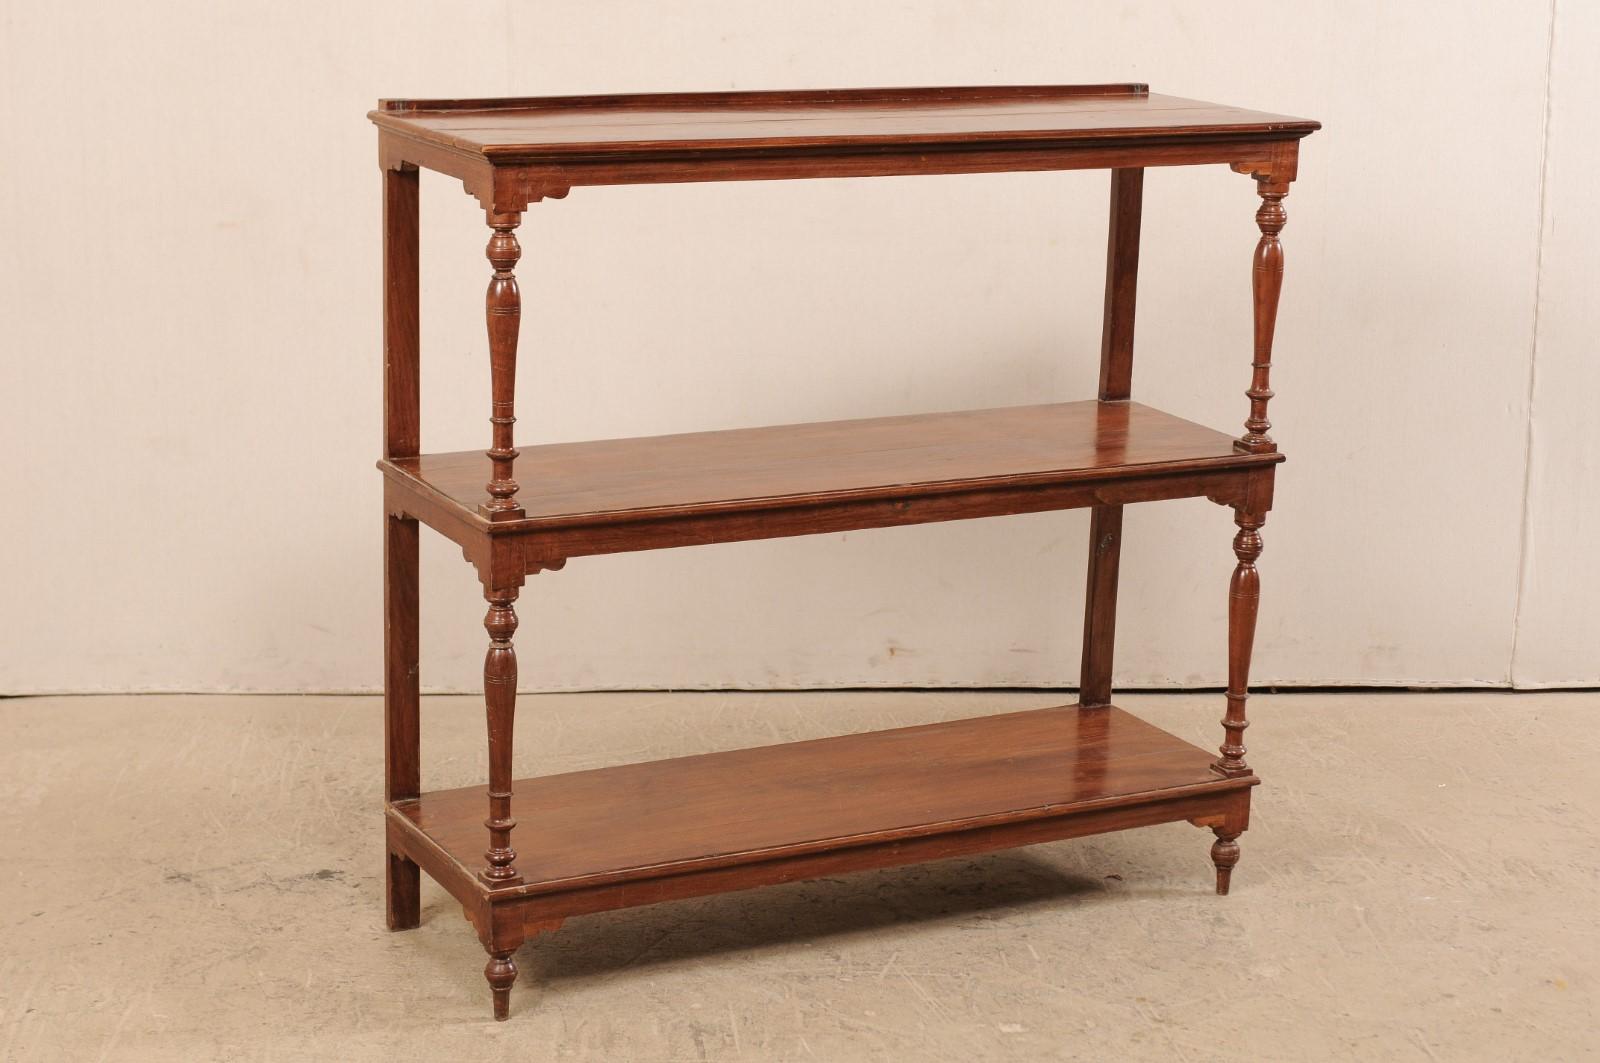 A vintage British Colonial bookshelf with three levels. This freestanding British Colonial shelving unit features three open shelves, supported with nicely turned side columns down front side and straight supports at back. Each shelf apron is